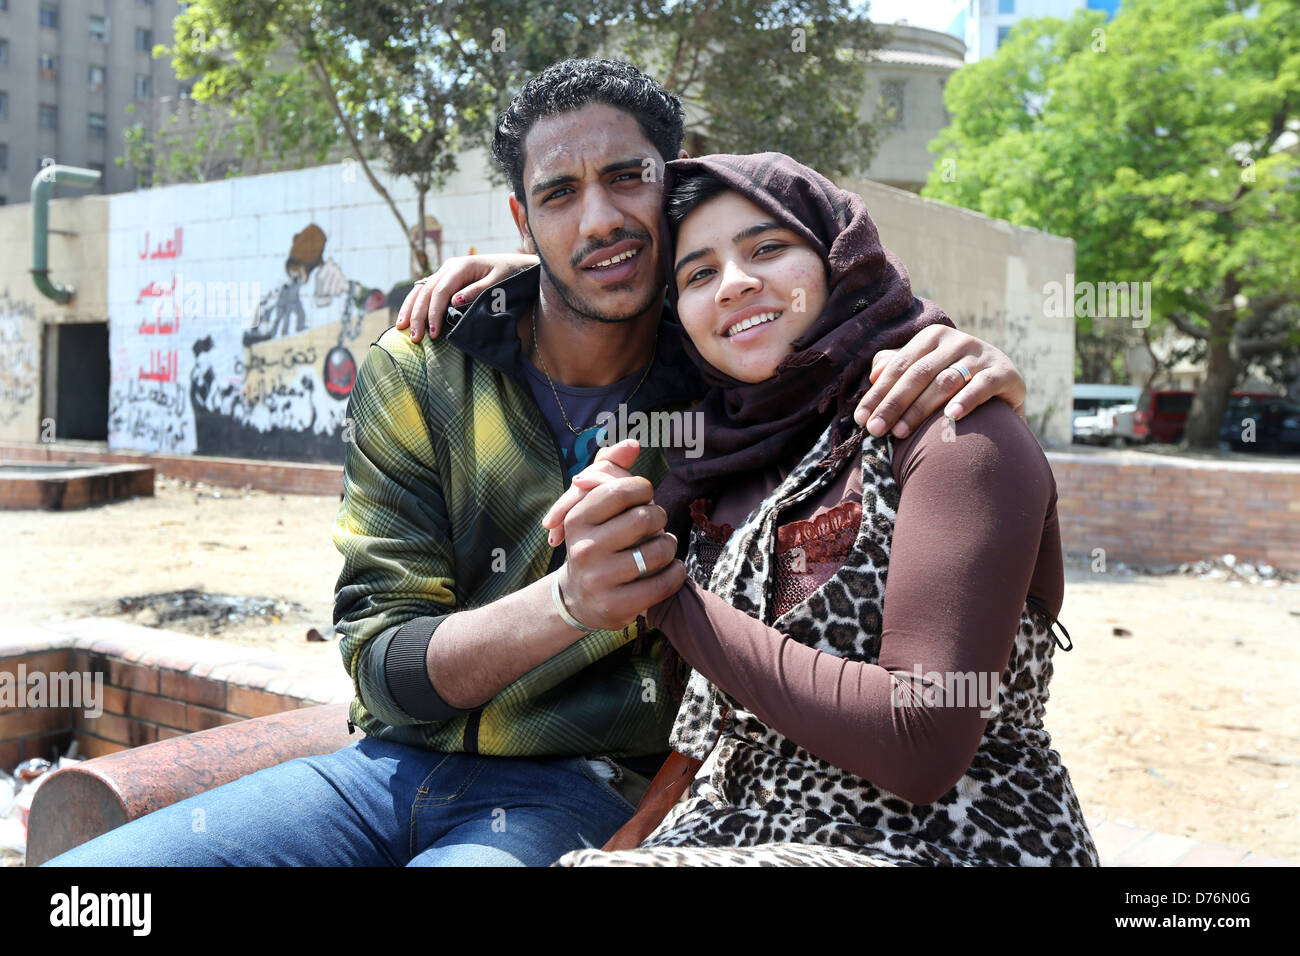 Young married couple holding hands, place Tahrir, Le Caire, Egypte Banque D'Images